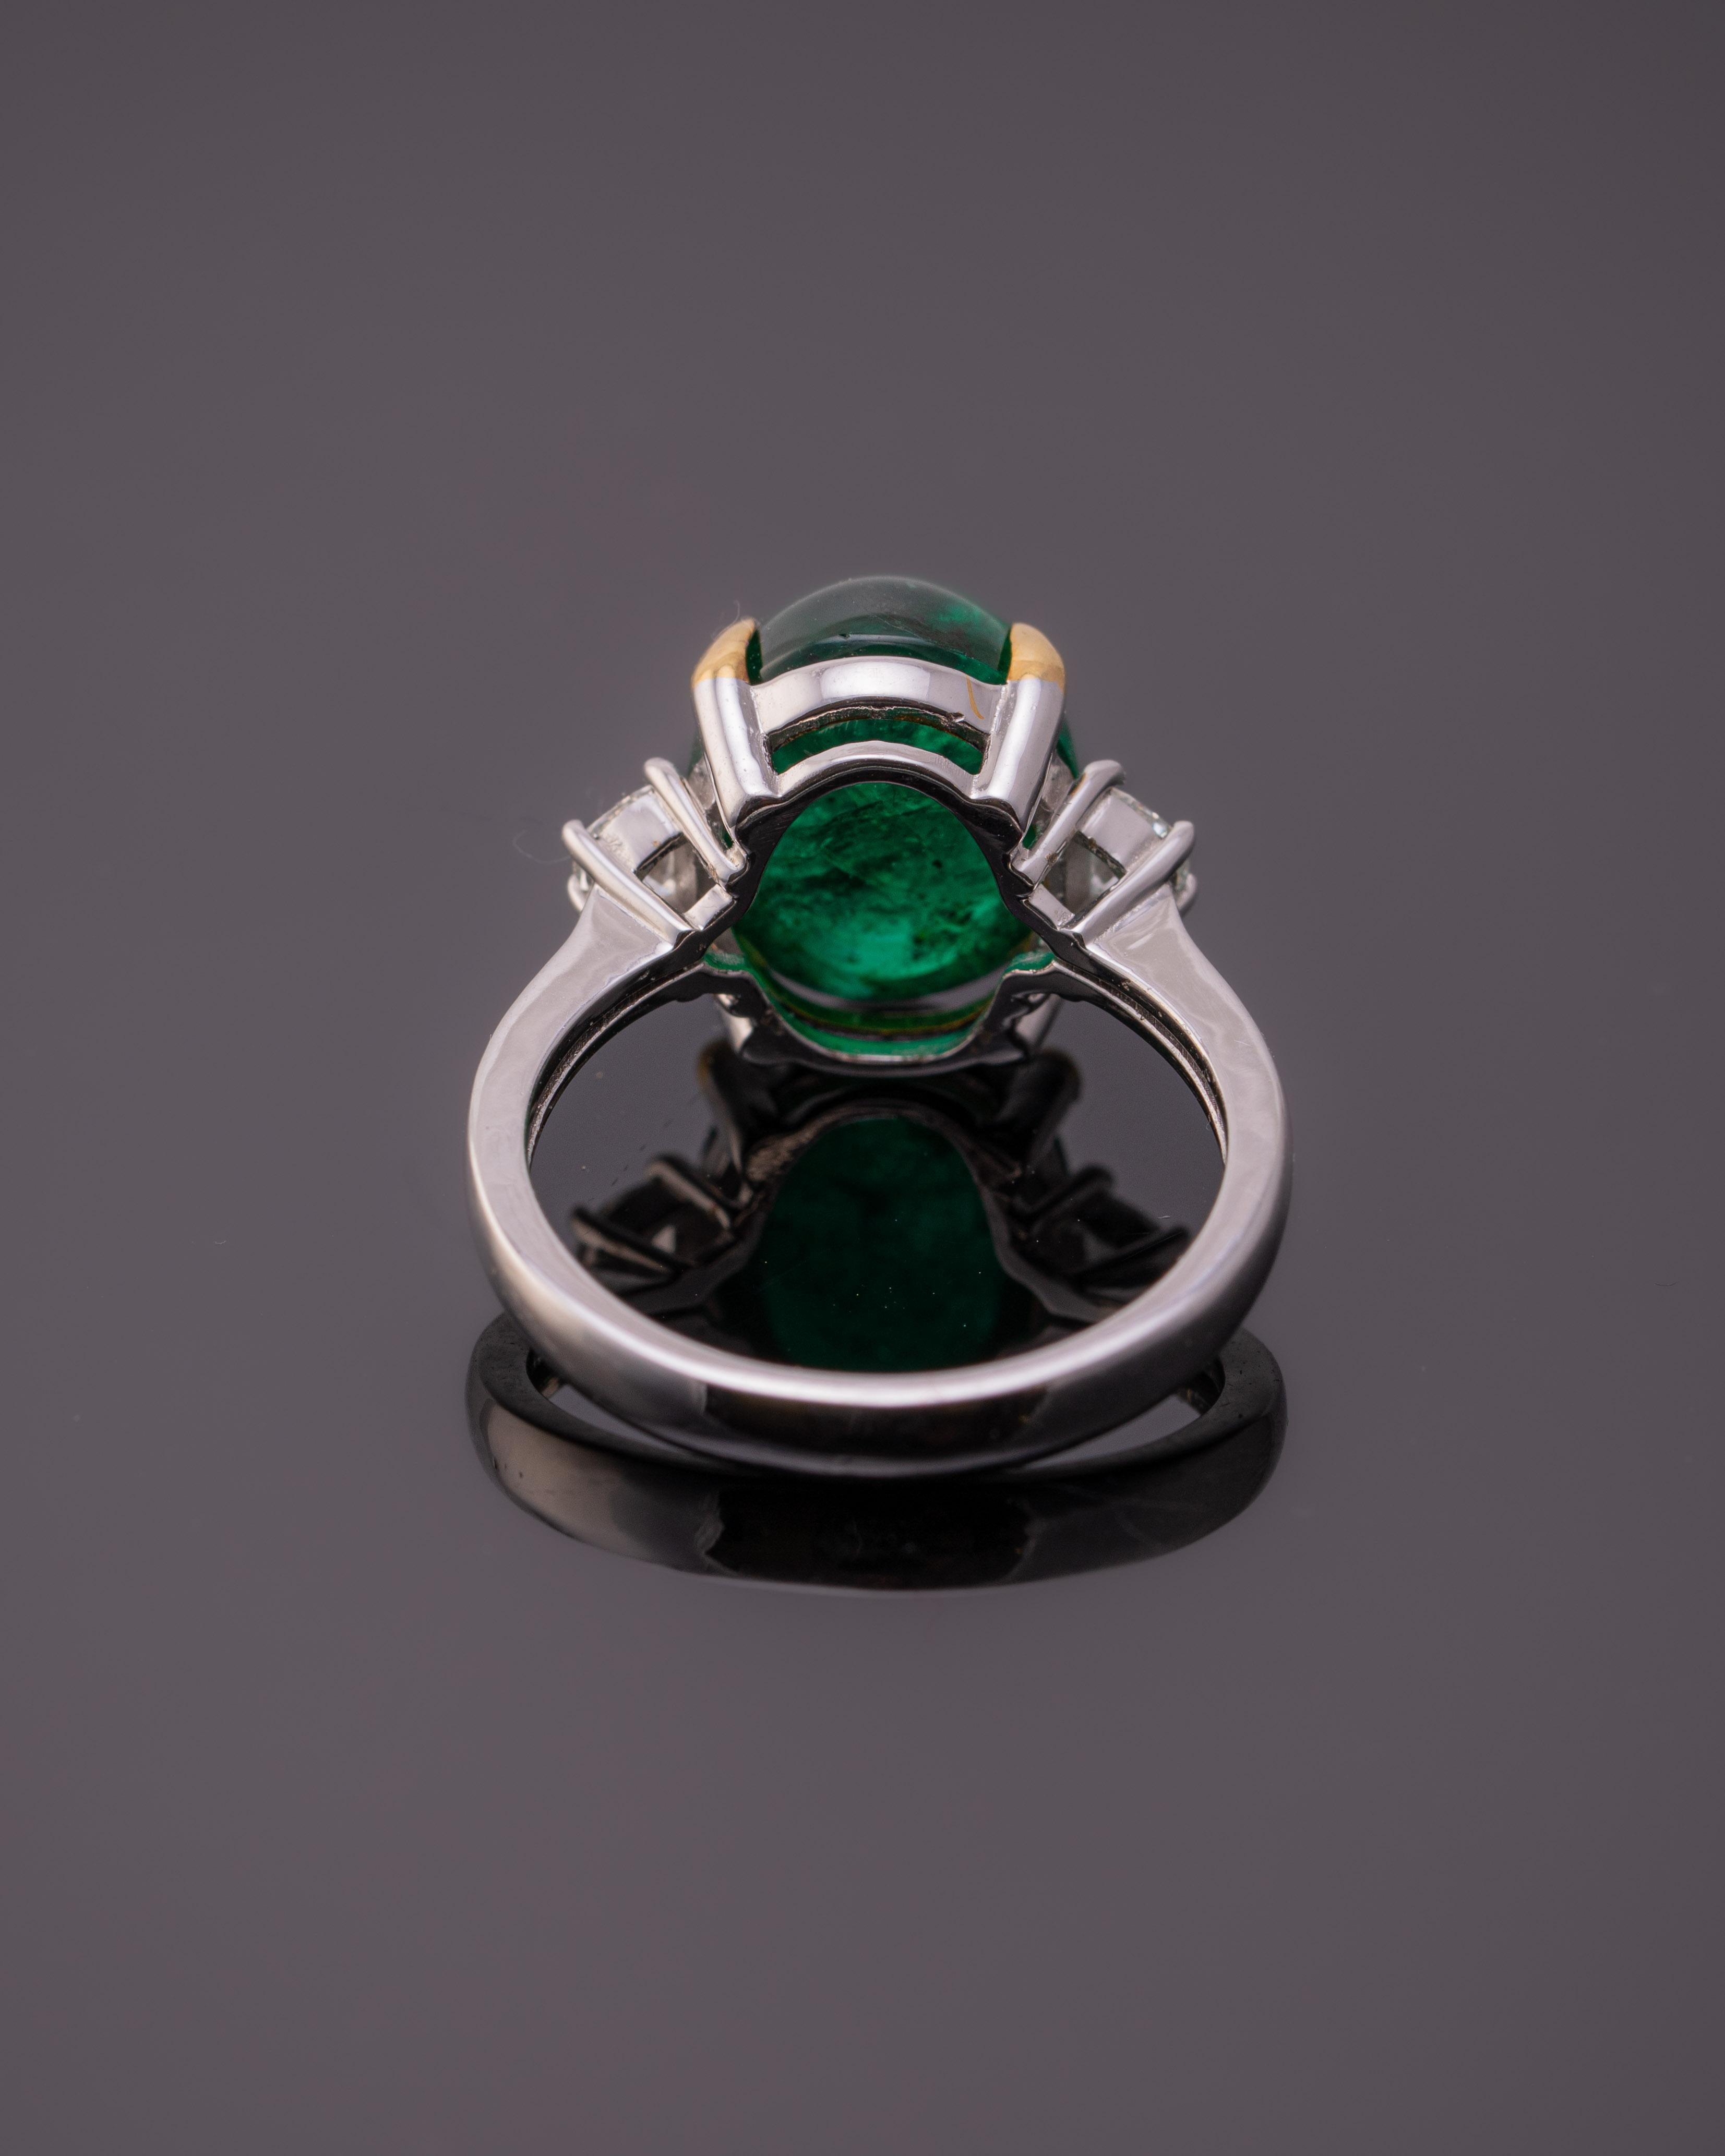 A classic 7 carat Zambian Emerald and 0.23 carat half-moon shaped White Diamond three-stone engagement ring. The Emerald cabochon is transparent, with a beautiful vivid green color - the stone is not treated/dyed and is absolutely natural. The